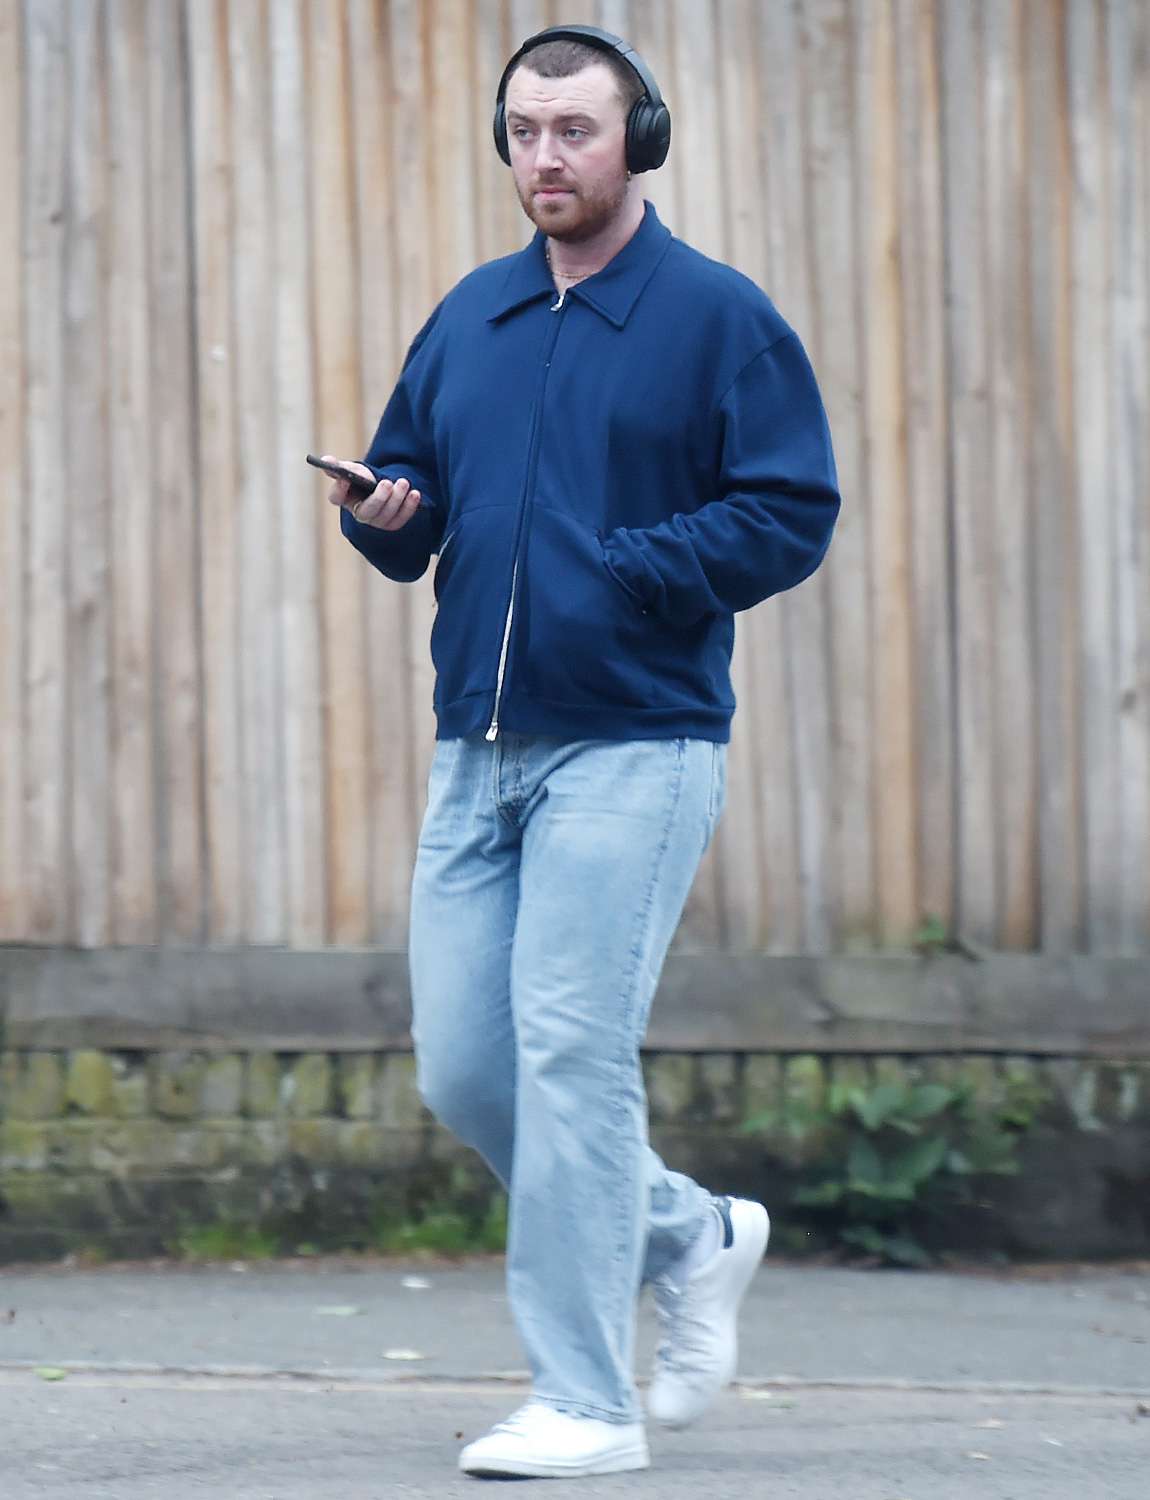 Sam Smith Looks Relaxed As They Stroll Through Hampstead Listening To Music On Headphones